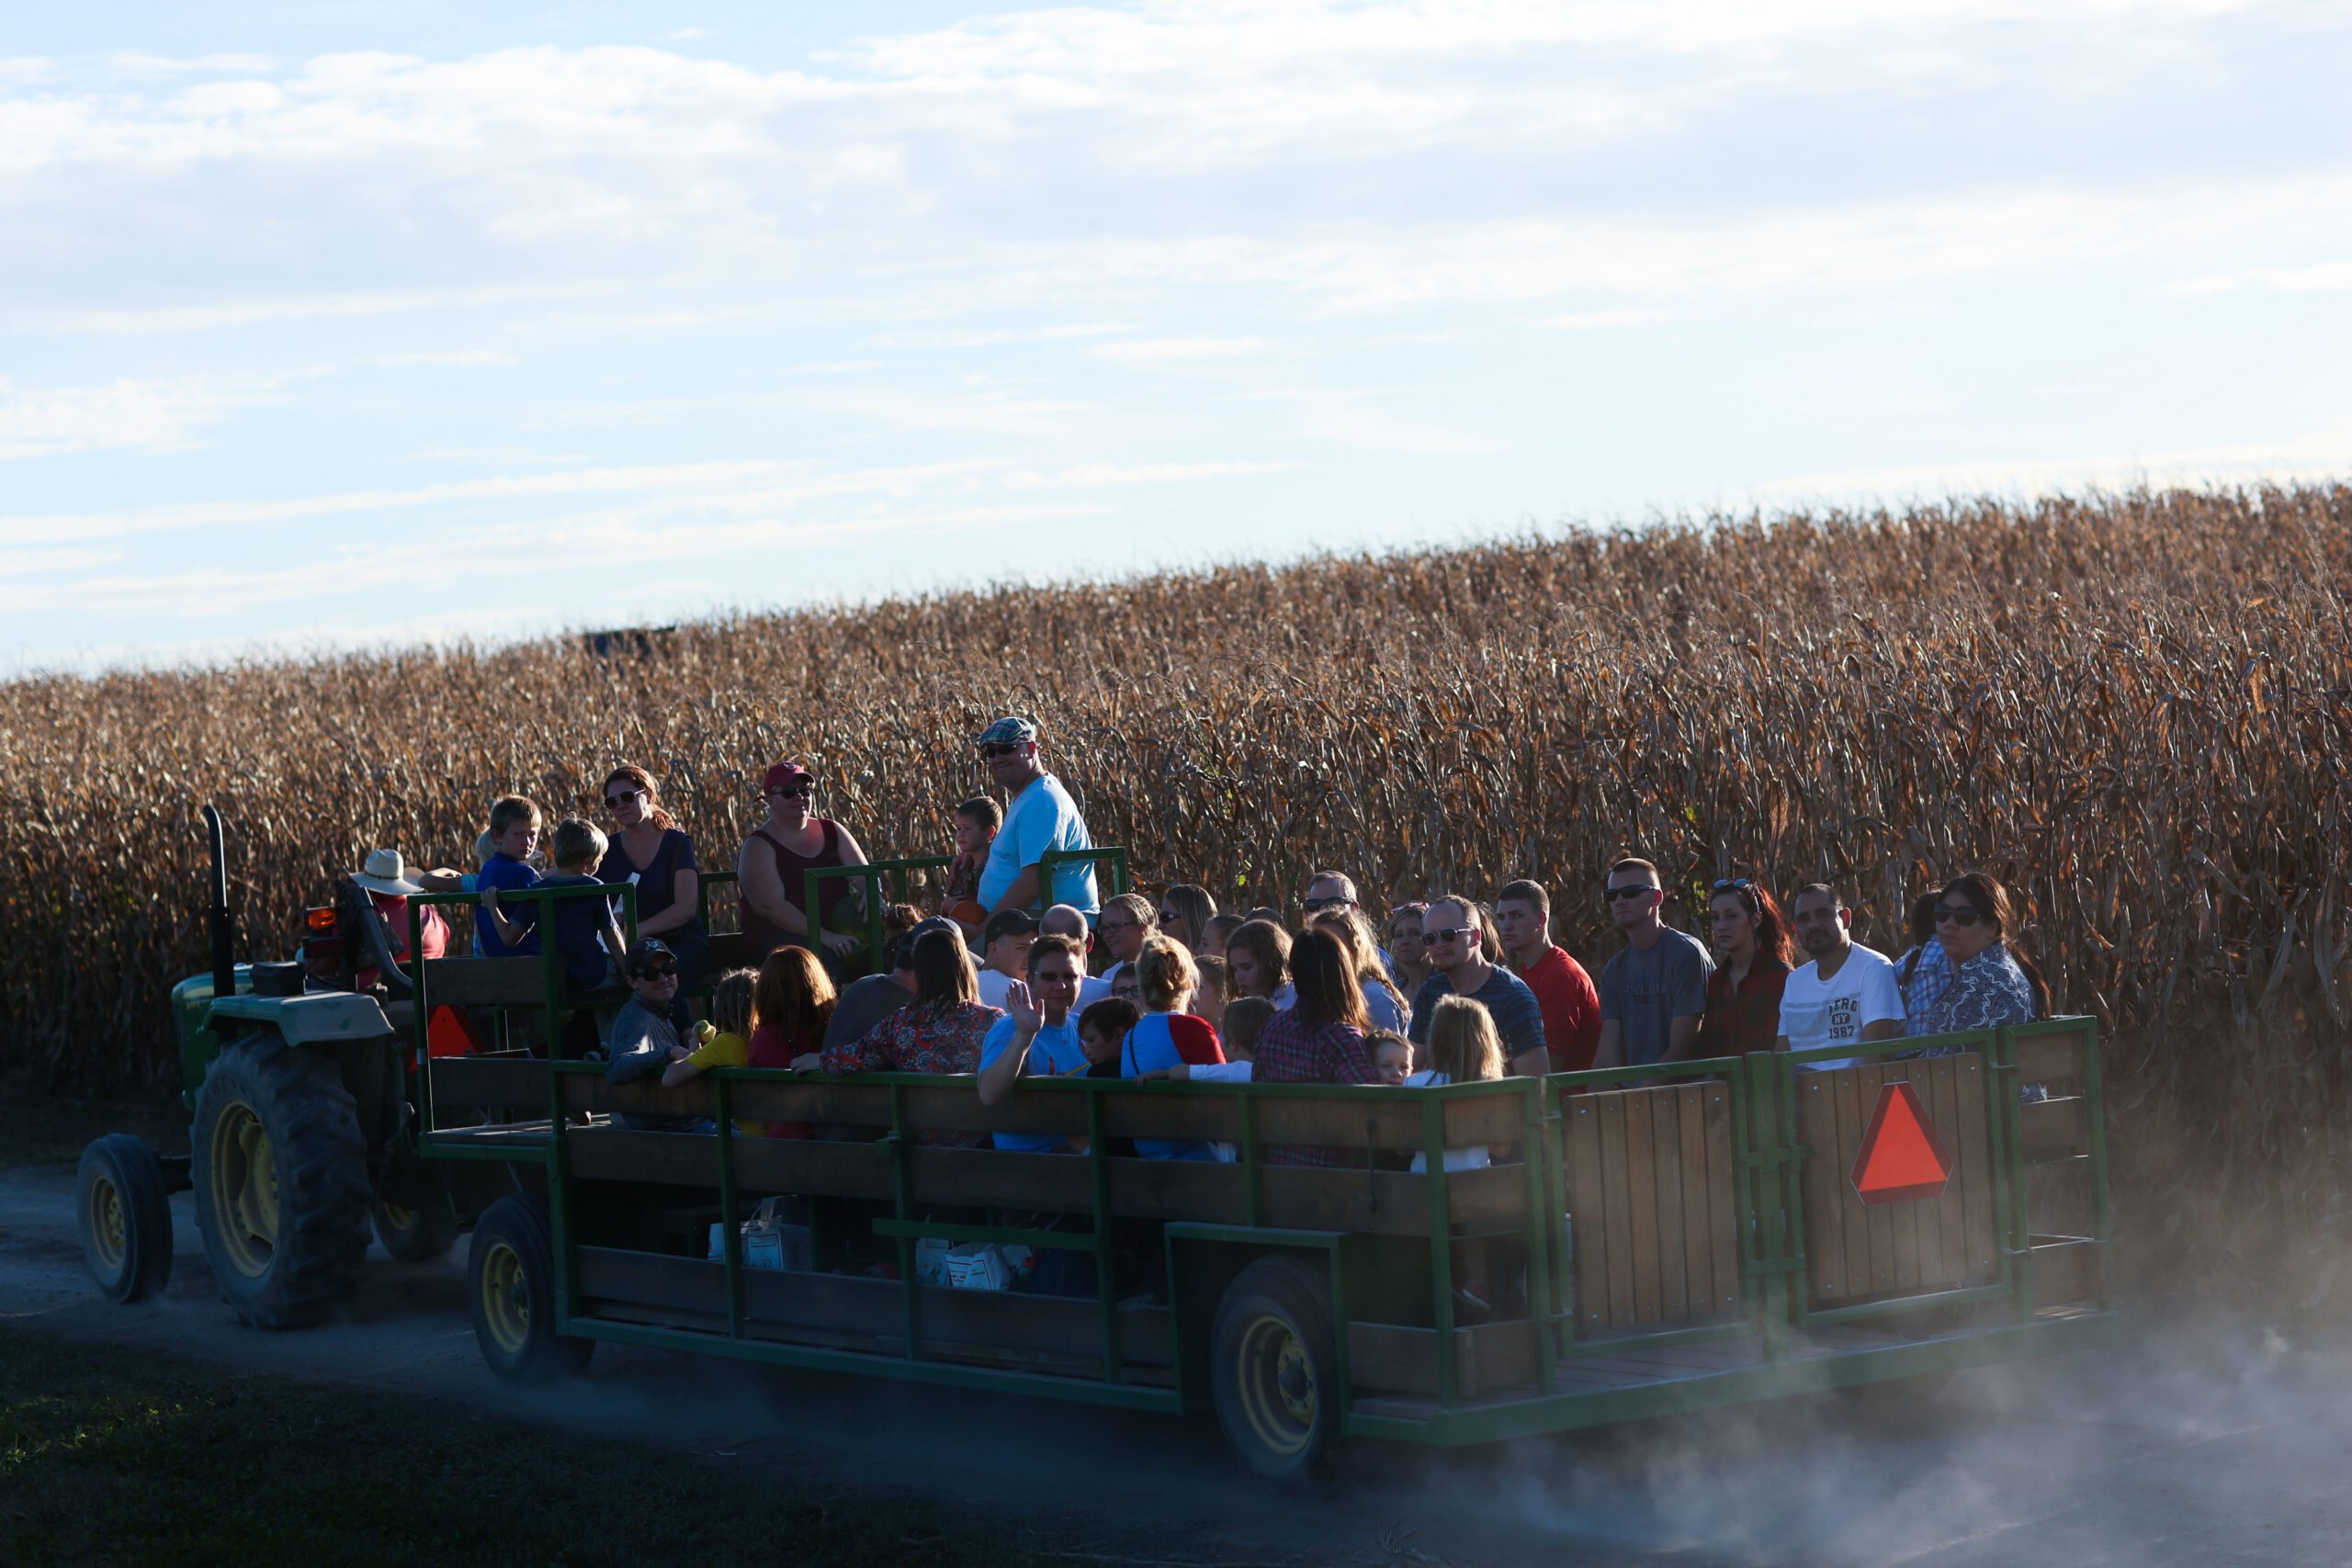 A tractor pulls a wagon full of passengers through a cornfield under a clear sky.